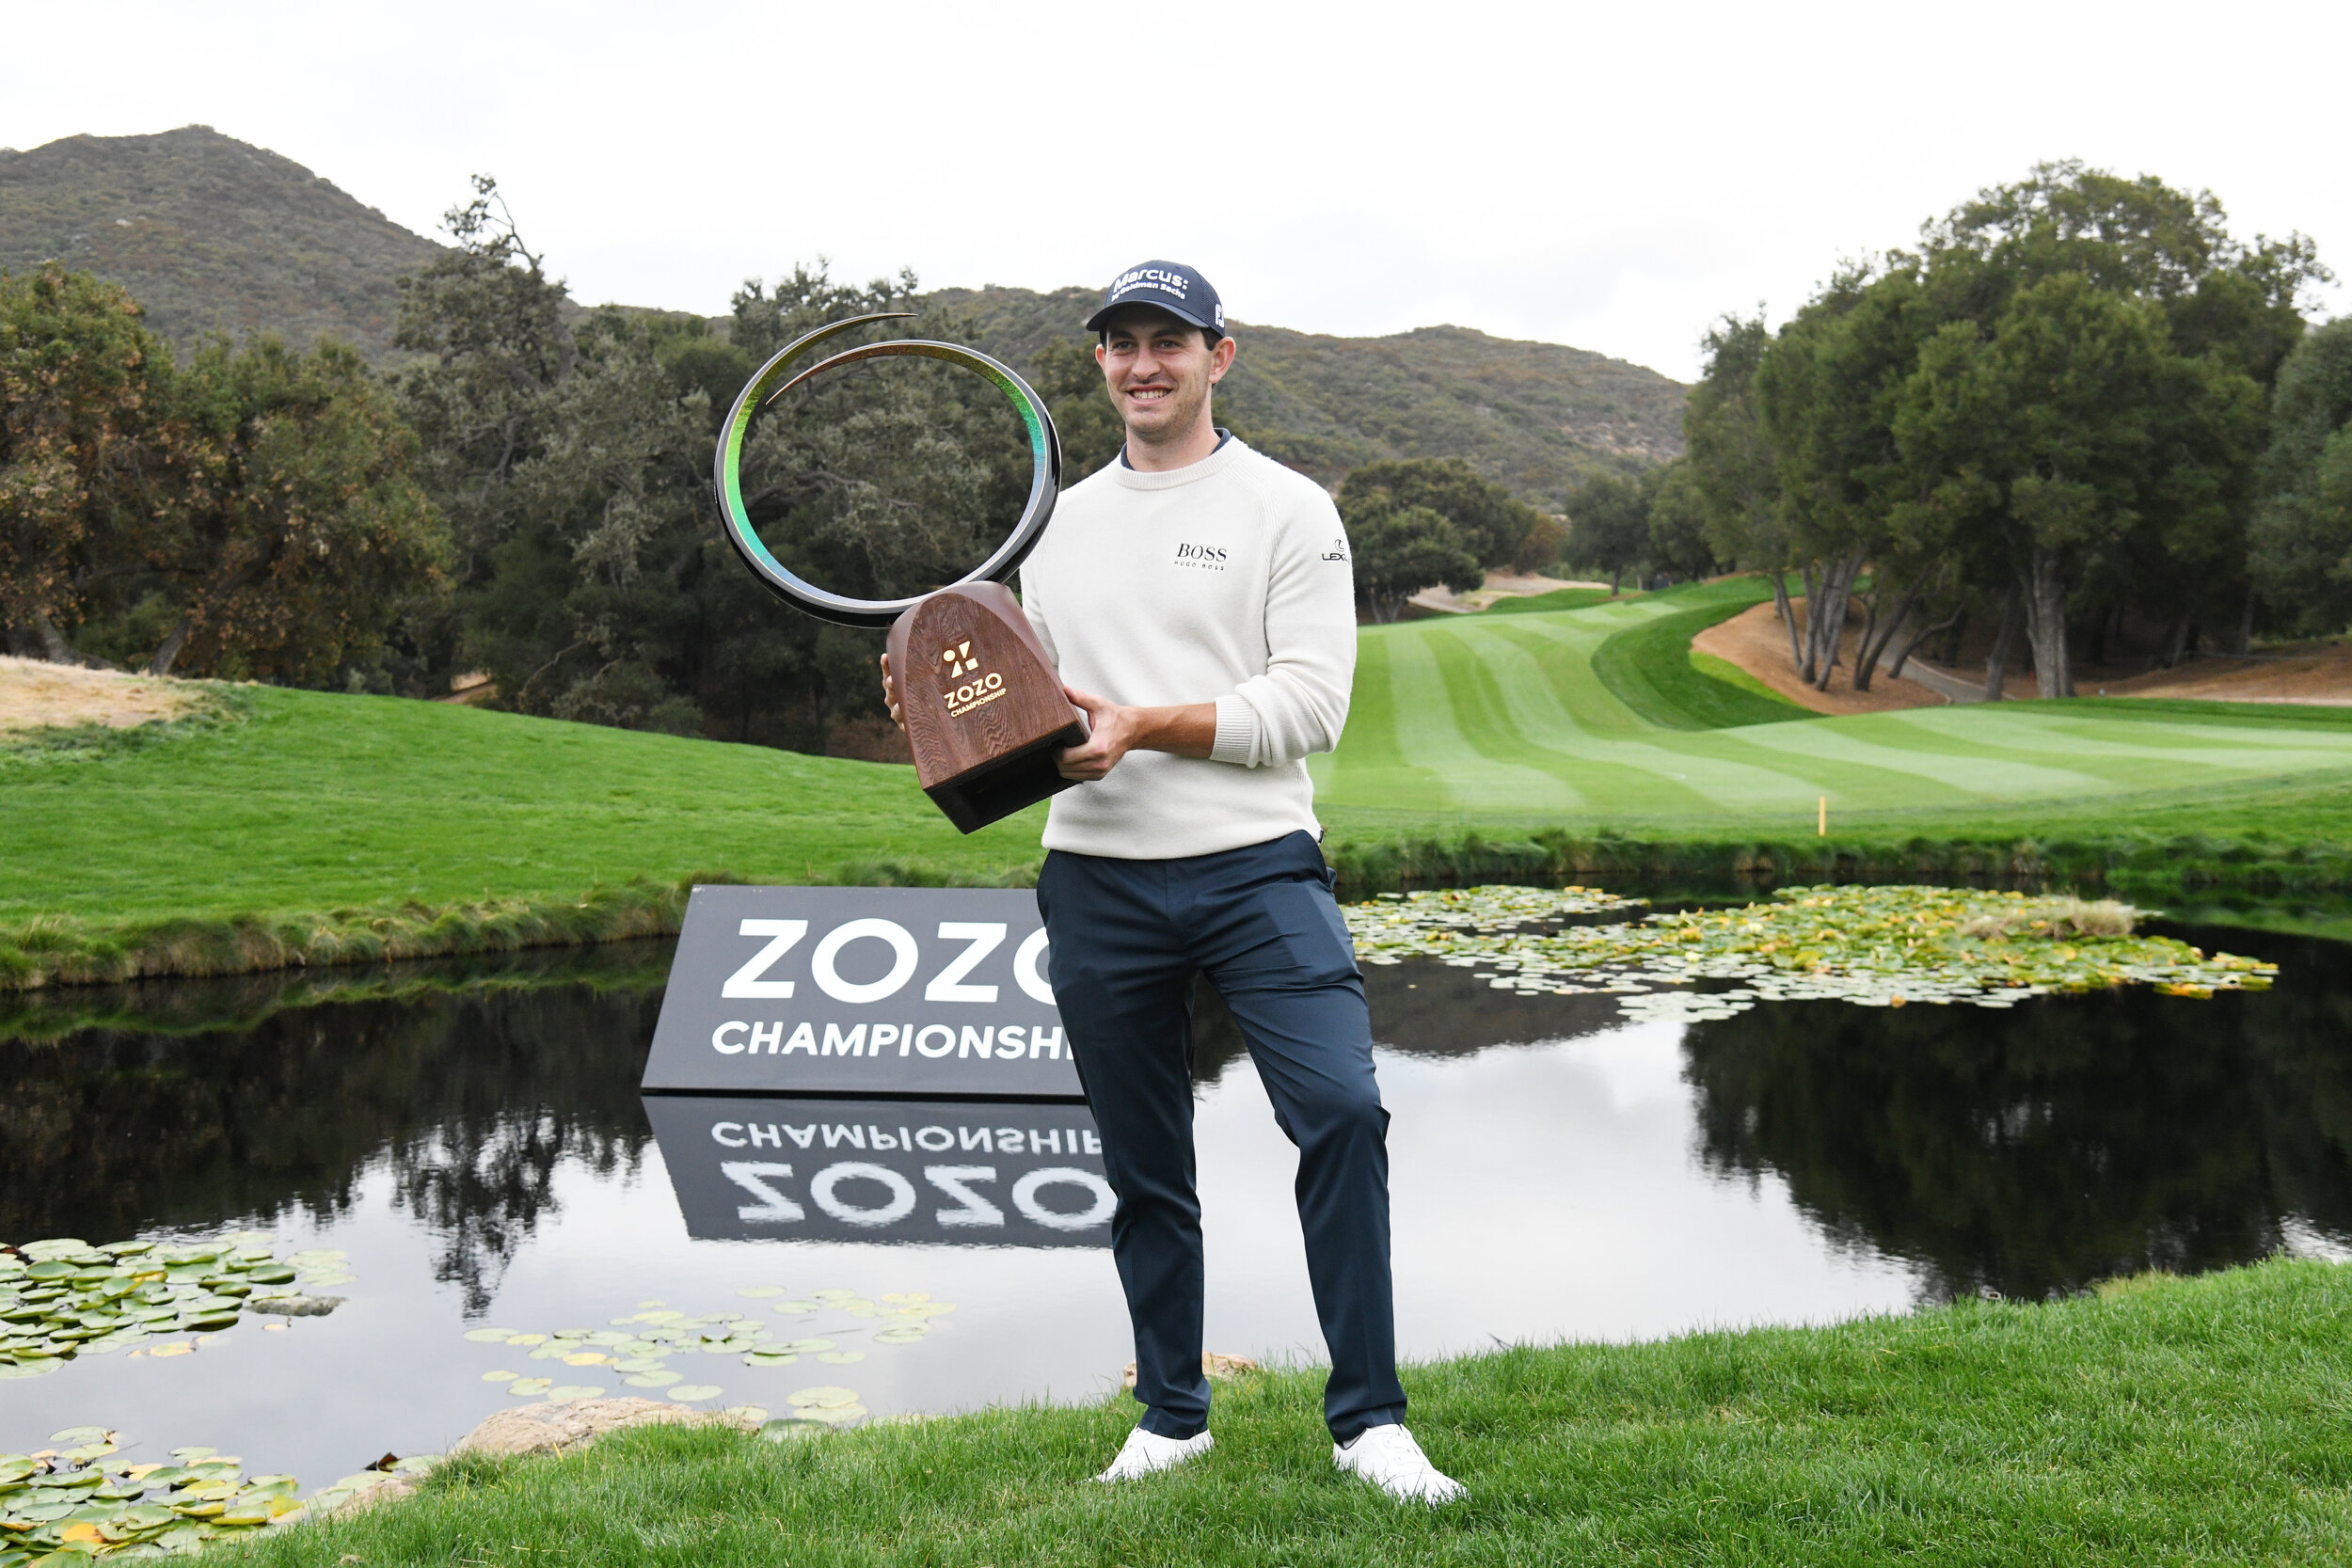  THOUSAND OAKS, CALIFORNIA - OCTOBER 25: Patrick Cantlay of the United States celebrates with the trophy after winning during the final round of the Zozo Championship @ Sherwood on October 25, 2020 in Thousand Oaks, California. (Photo by Harry How/Ge